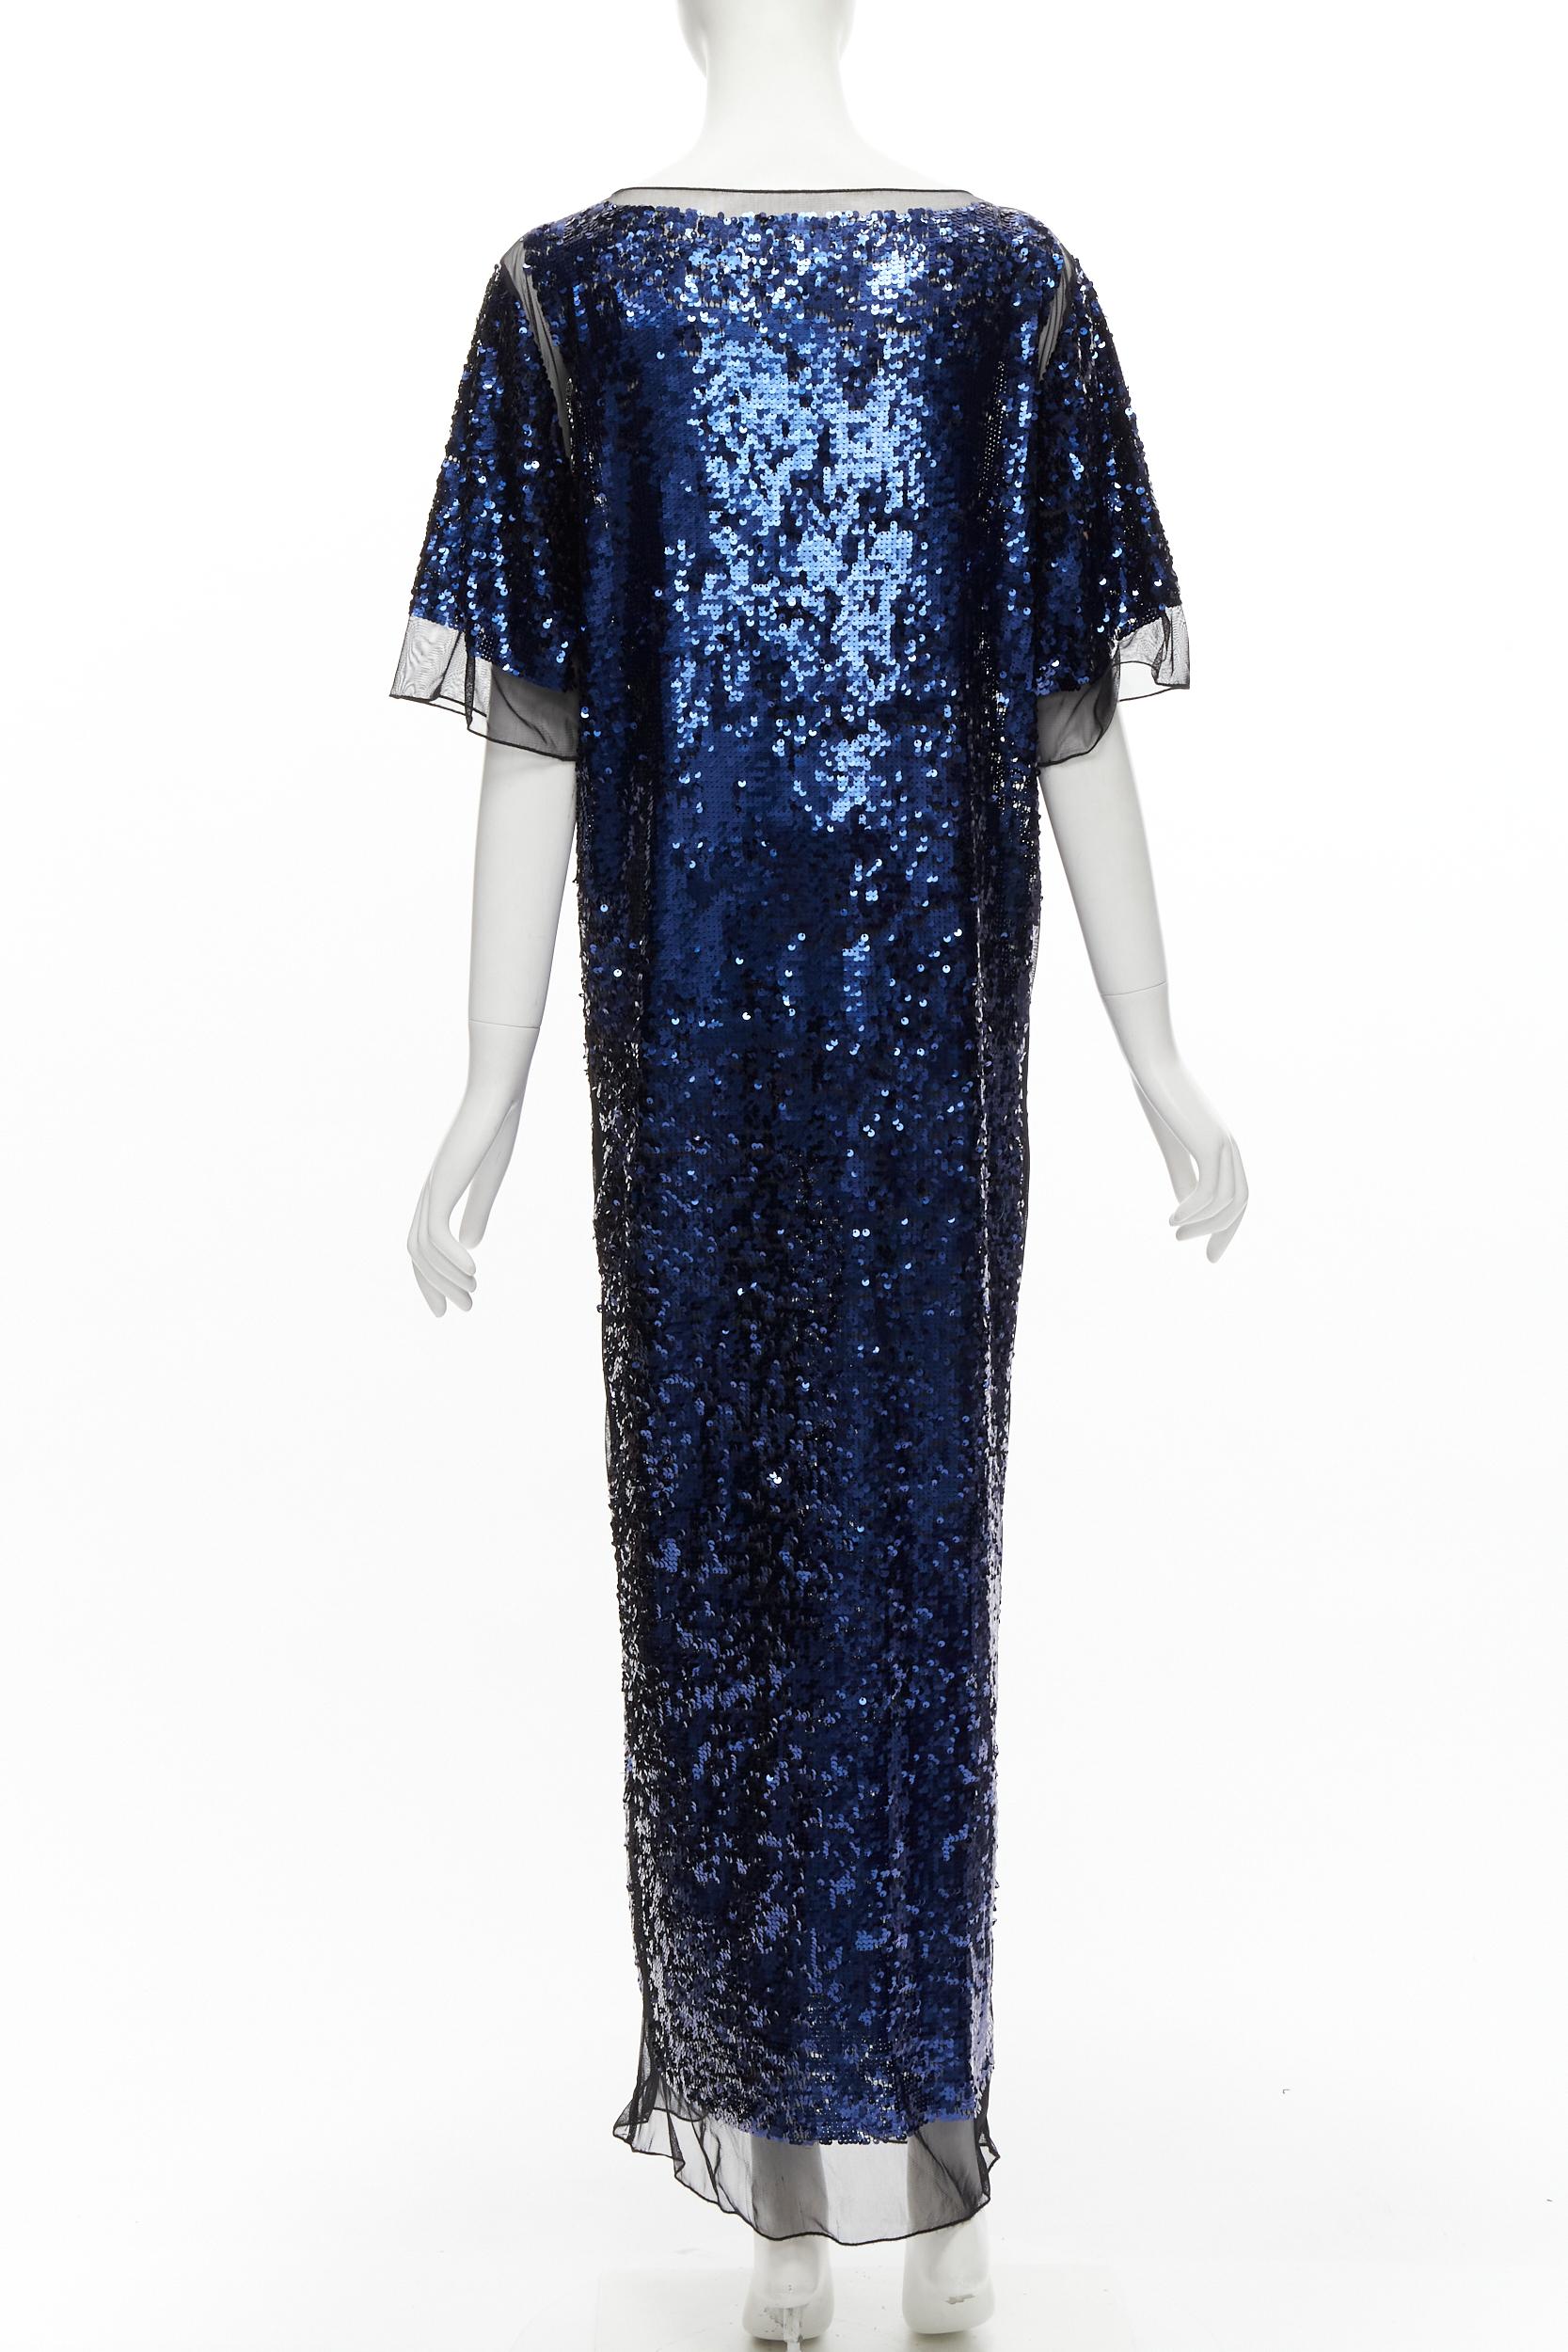 BY MALENE BIRGER blue sequins overlay black sheer evening gown dress M For Sale 1